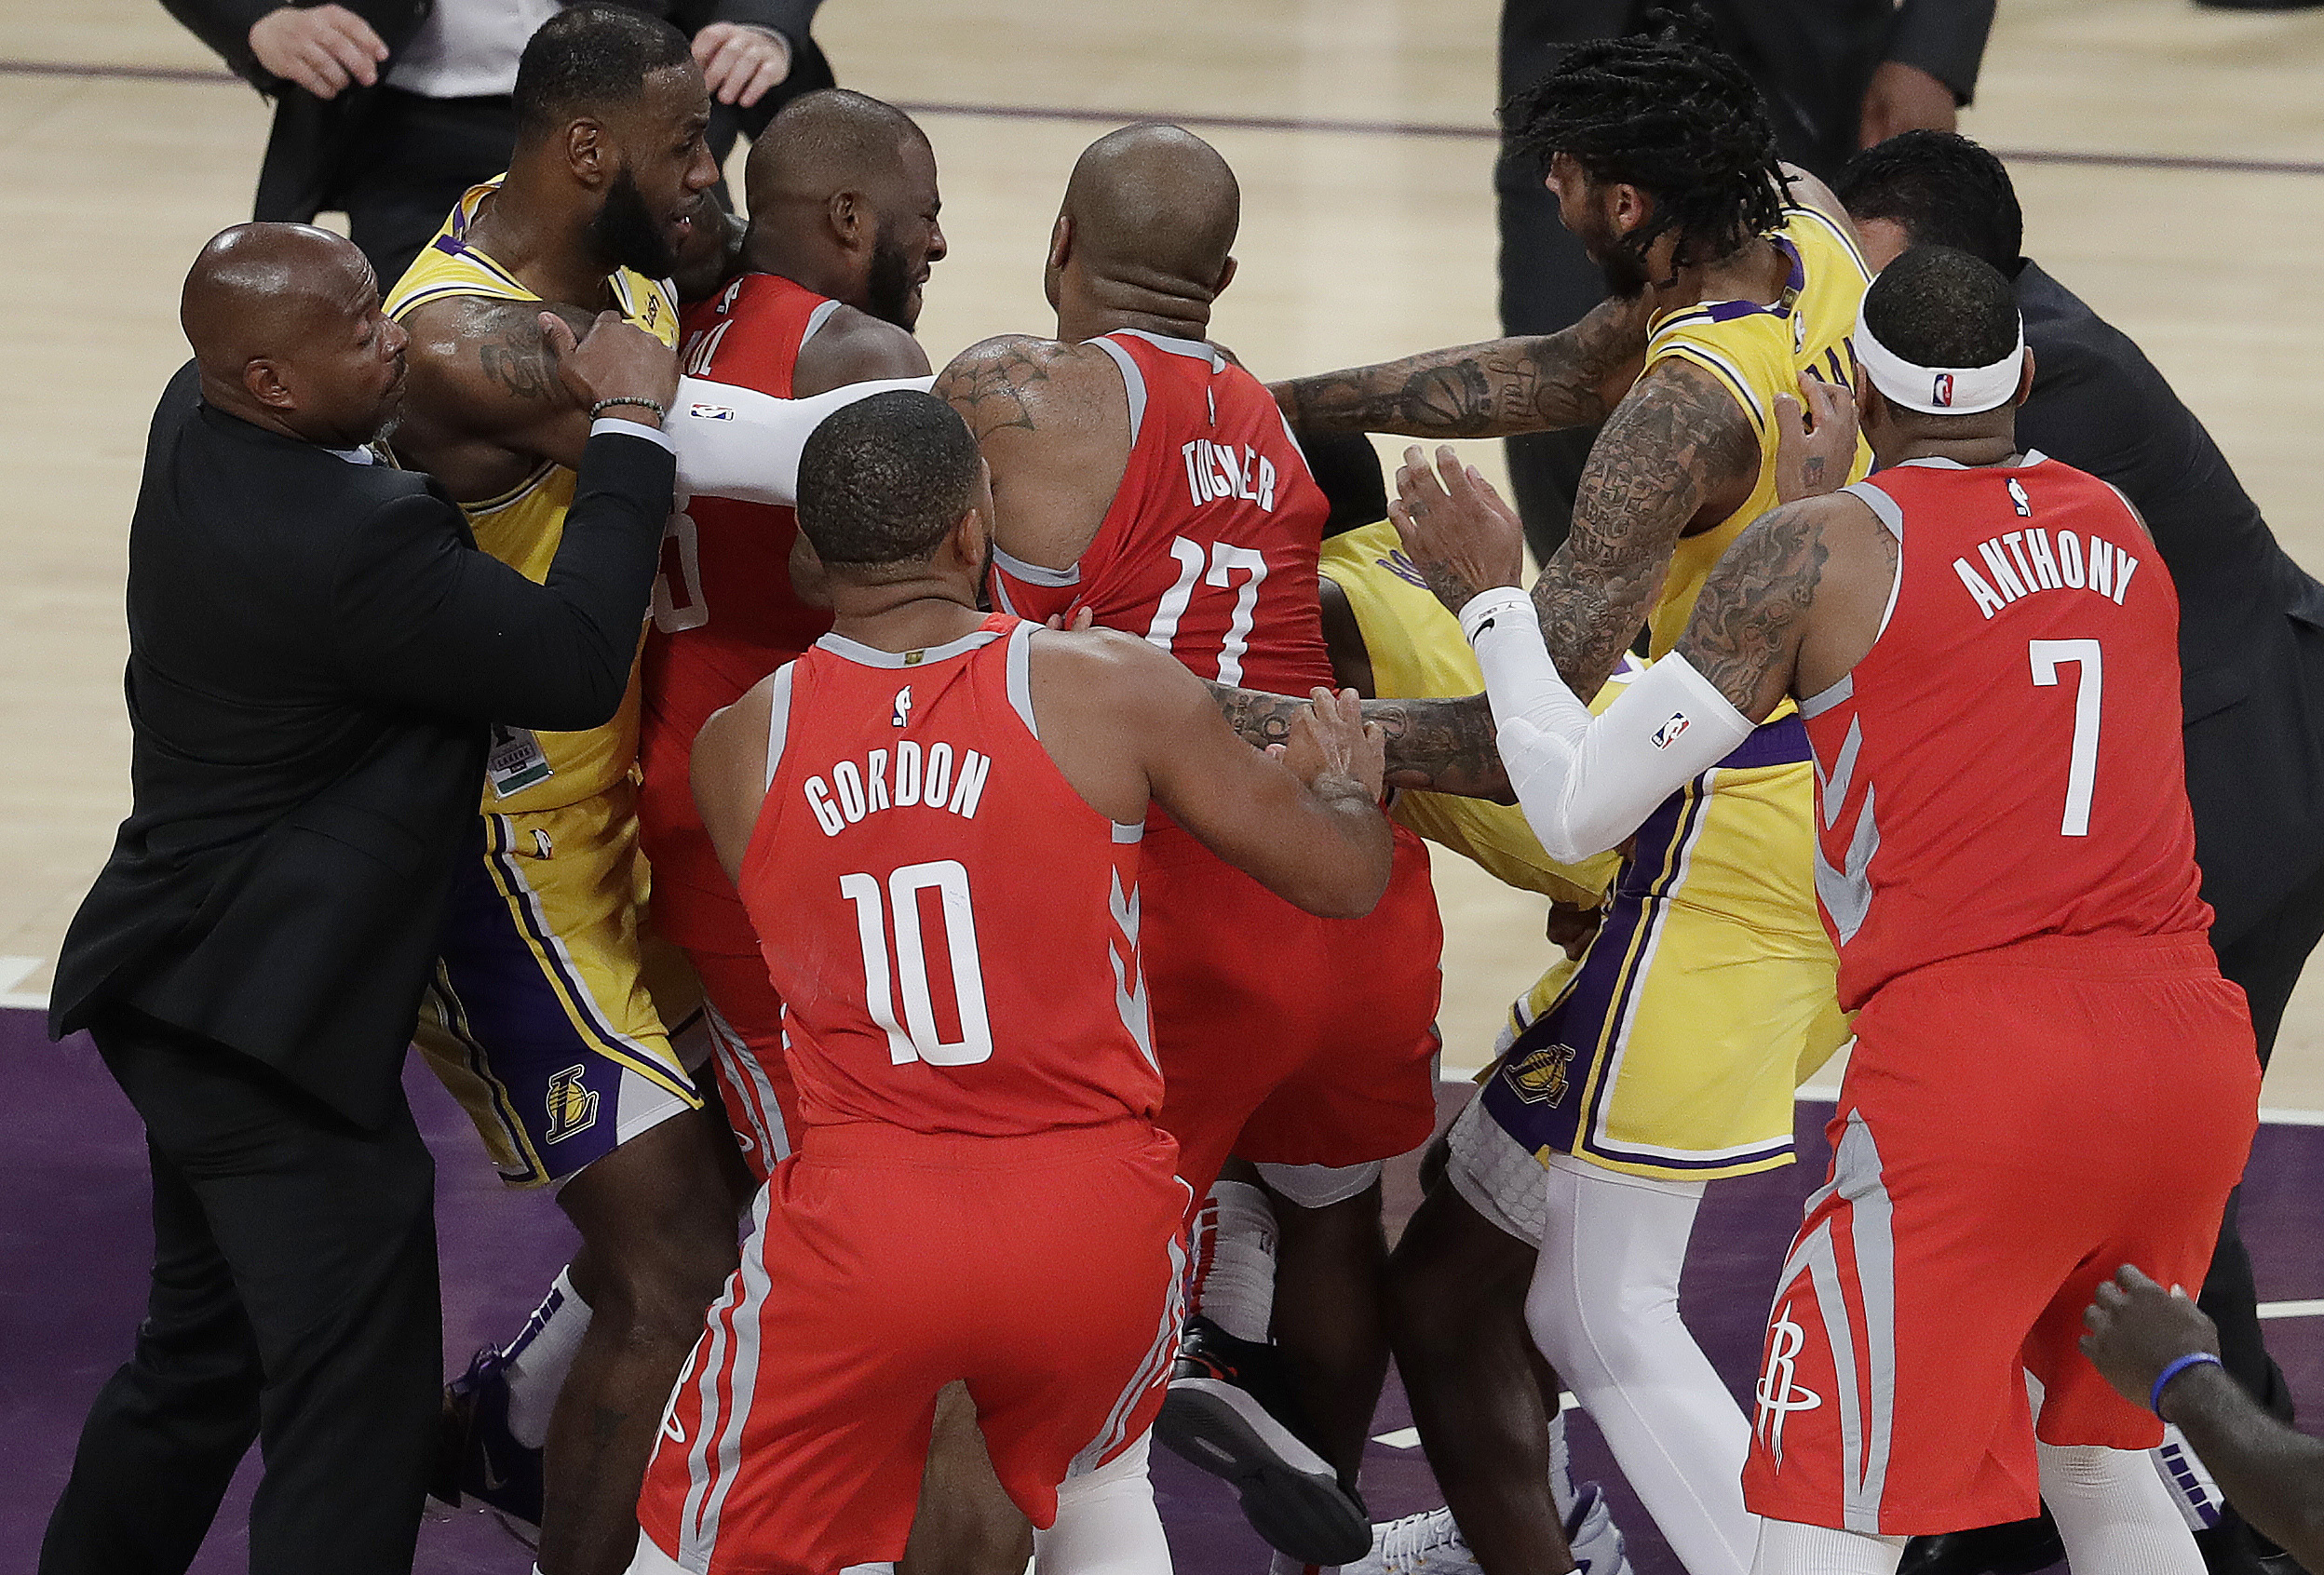 3 Players Ejected After A Full-On Brawl During The Lakers-Rockets Match